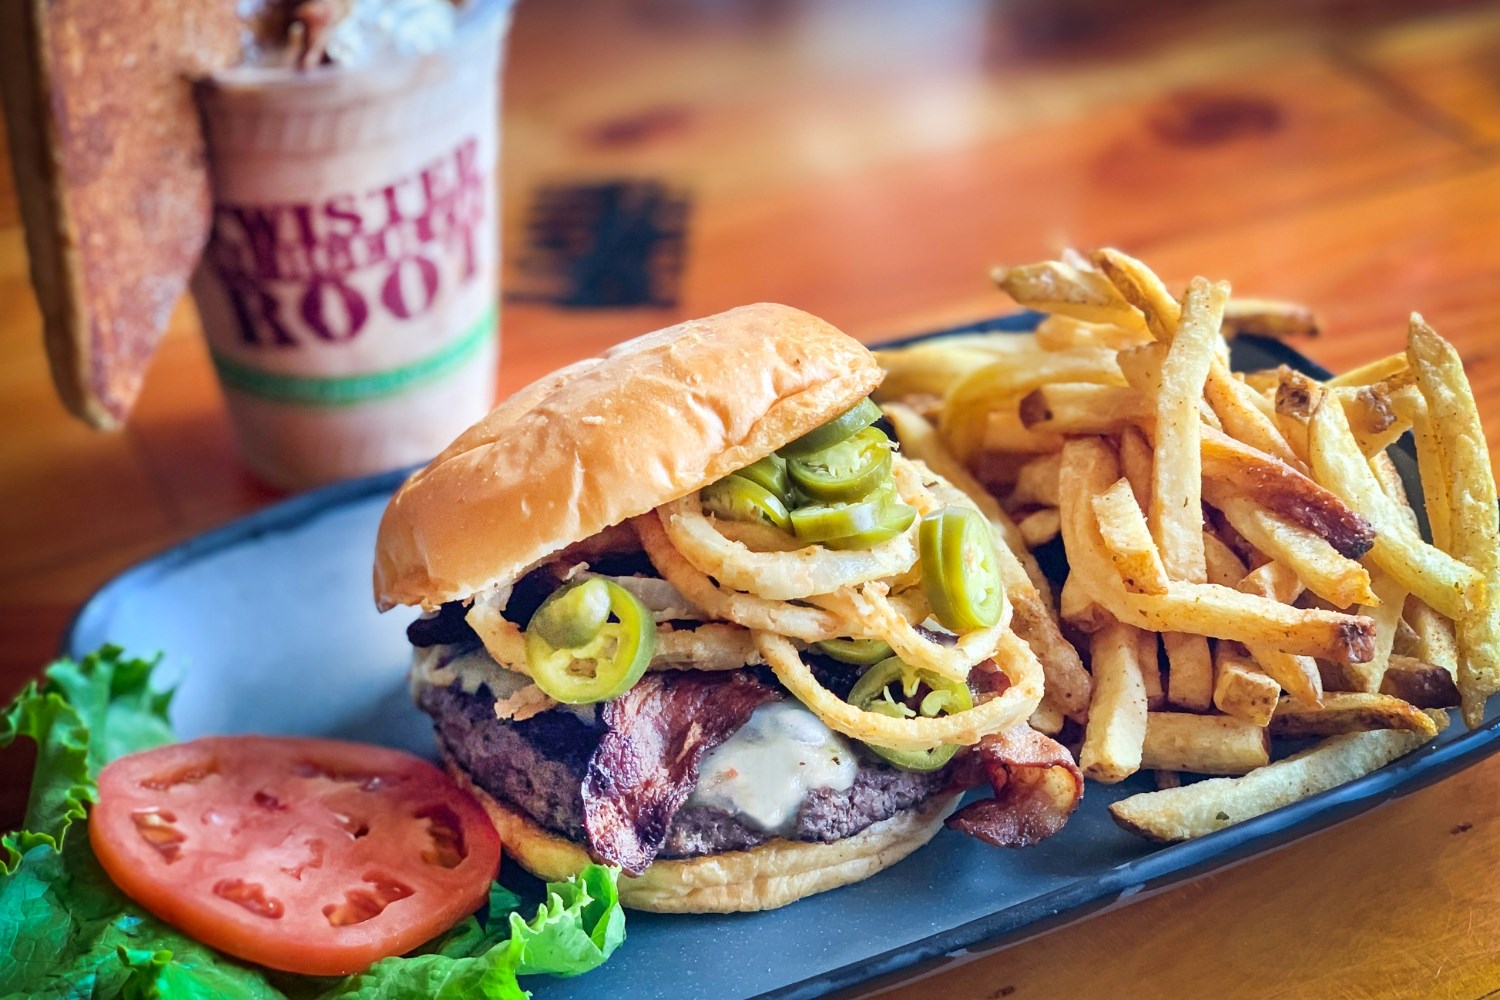 15-twisted-root-burger-nutrition-facts